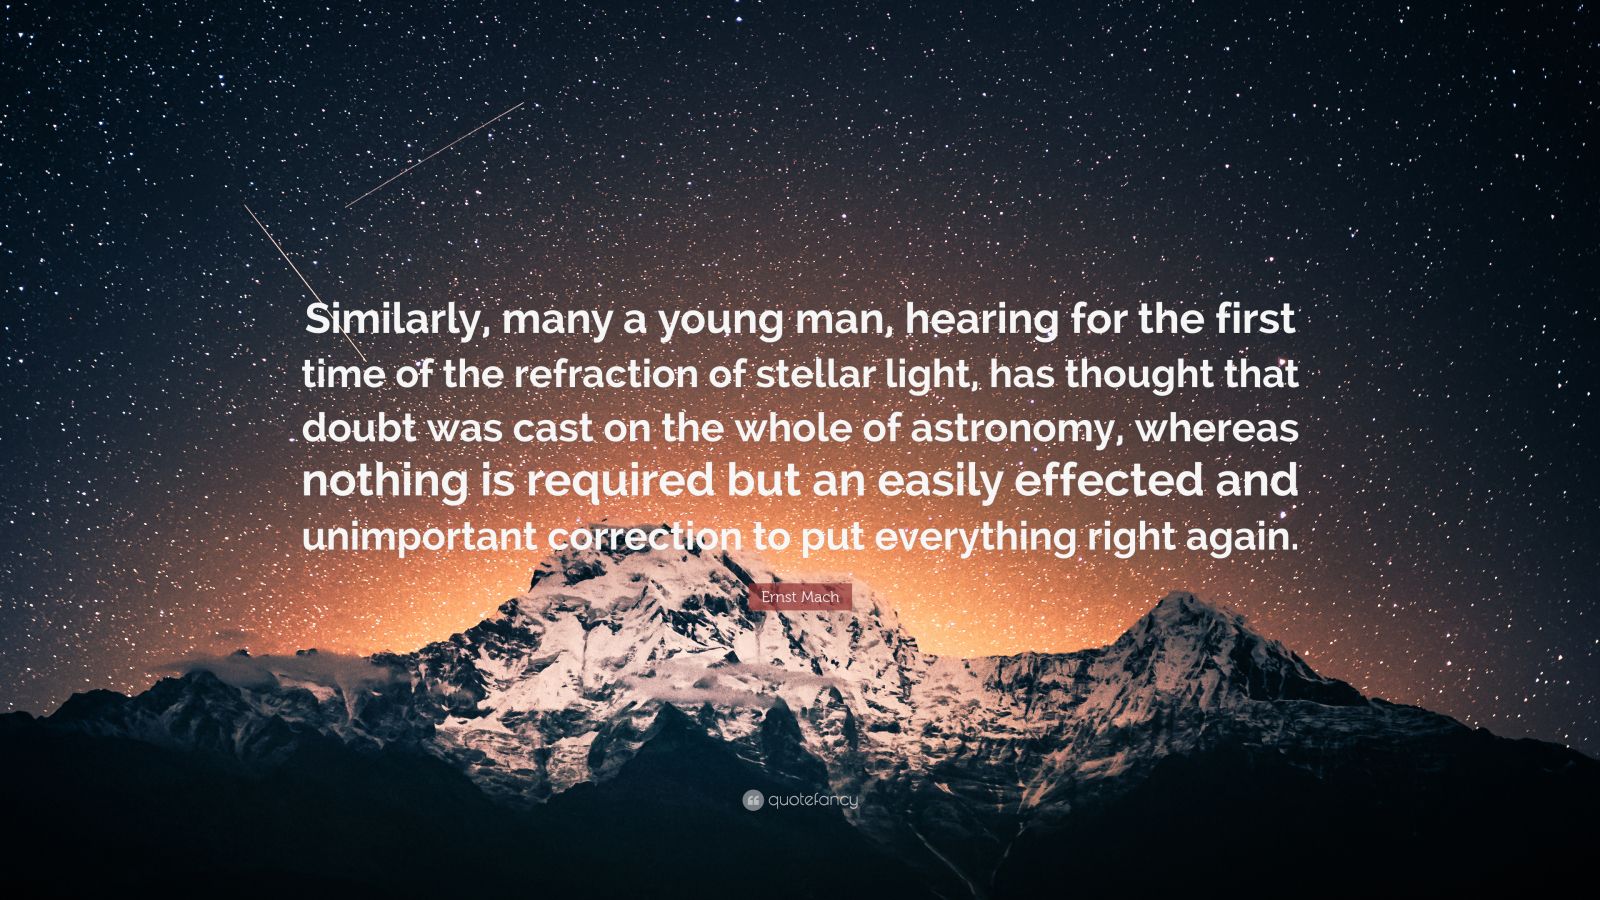 Ernst Mach Quote: “Similarly, many a young man, hearing for the first time  of the refraction of stellar light, has thought that doubt was c...”